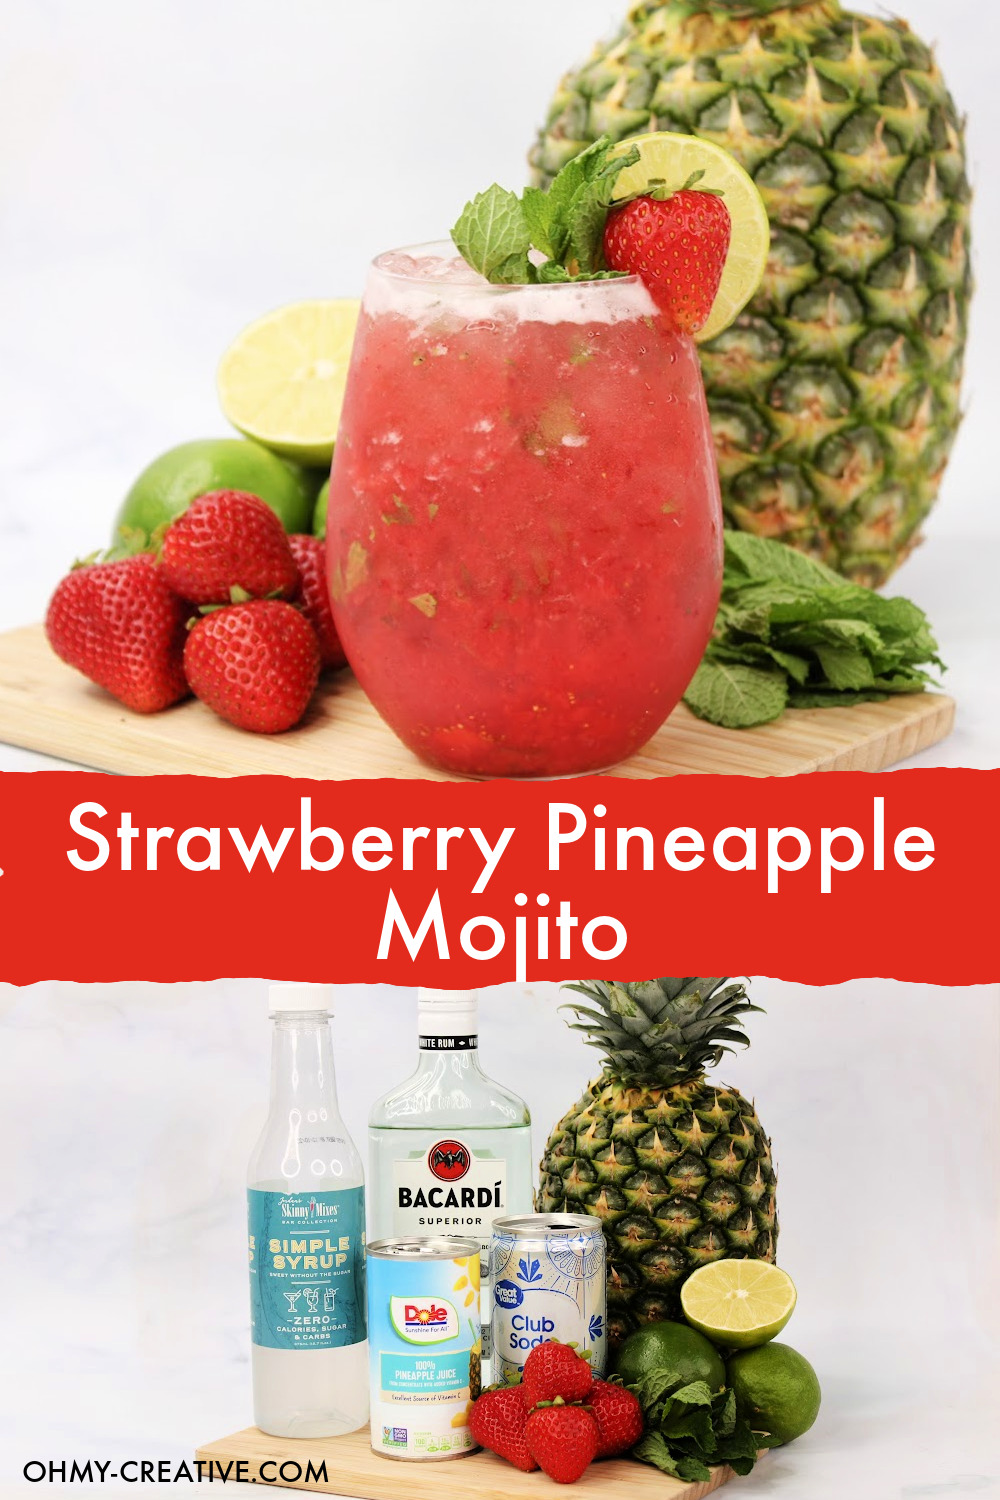 This Strawberry Pineapple Mojito cocktail is garnished with strawberry and mint. It is sitting on a wooden cutting board surrounded by strawberries, limes and a whole pineapple. A second photo shows the mojito ingredients.